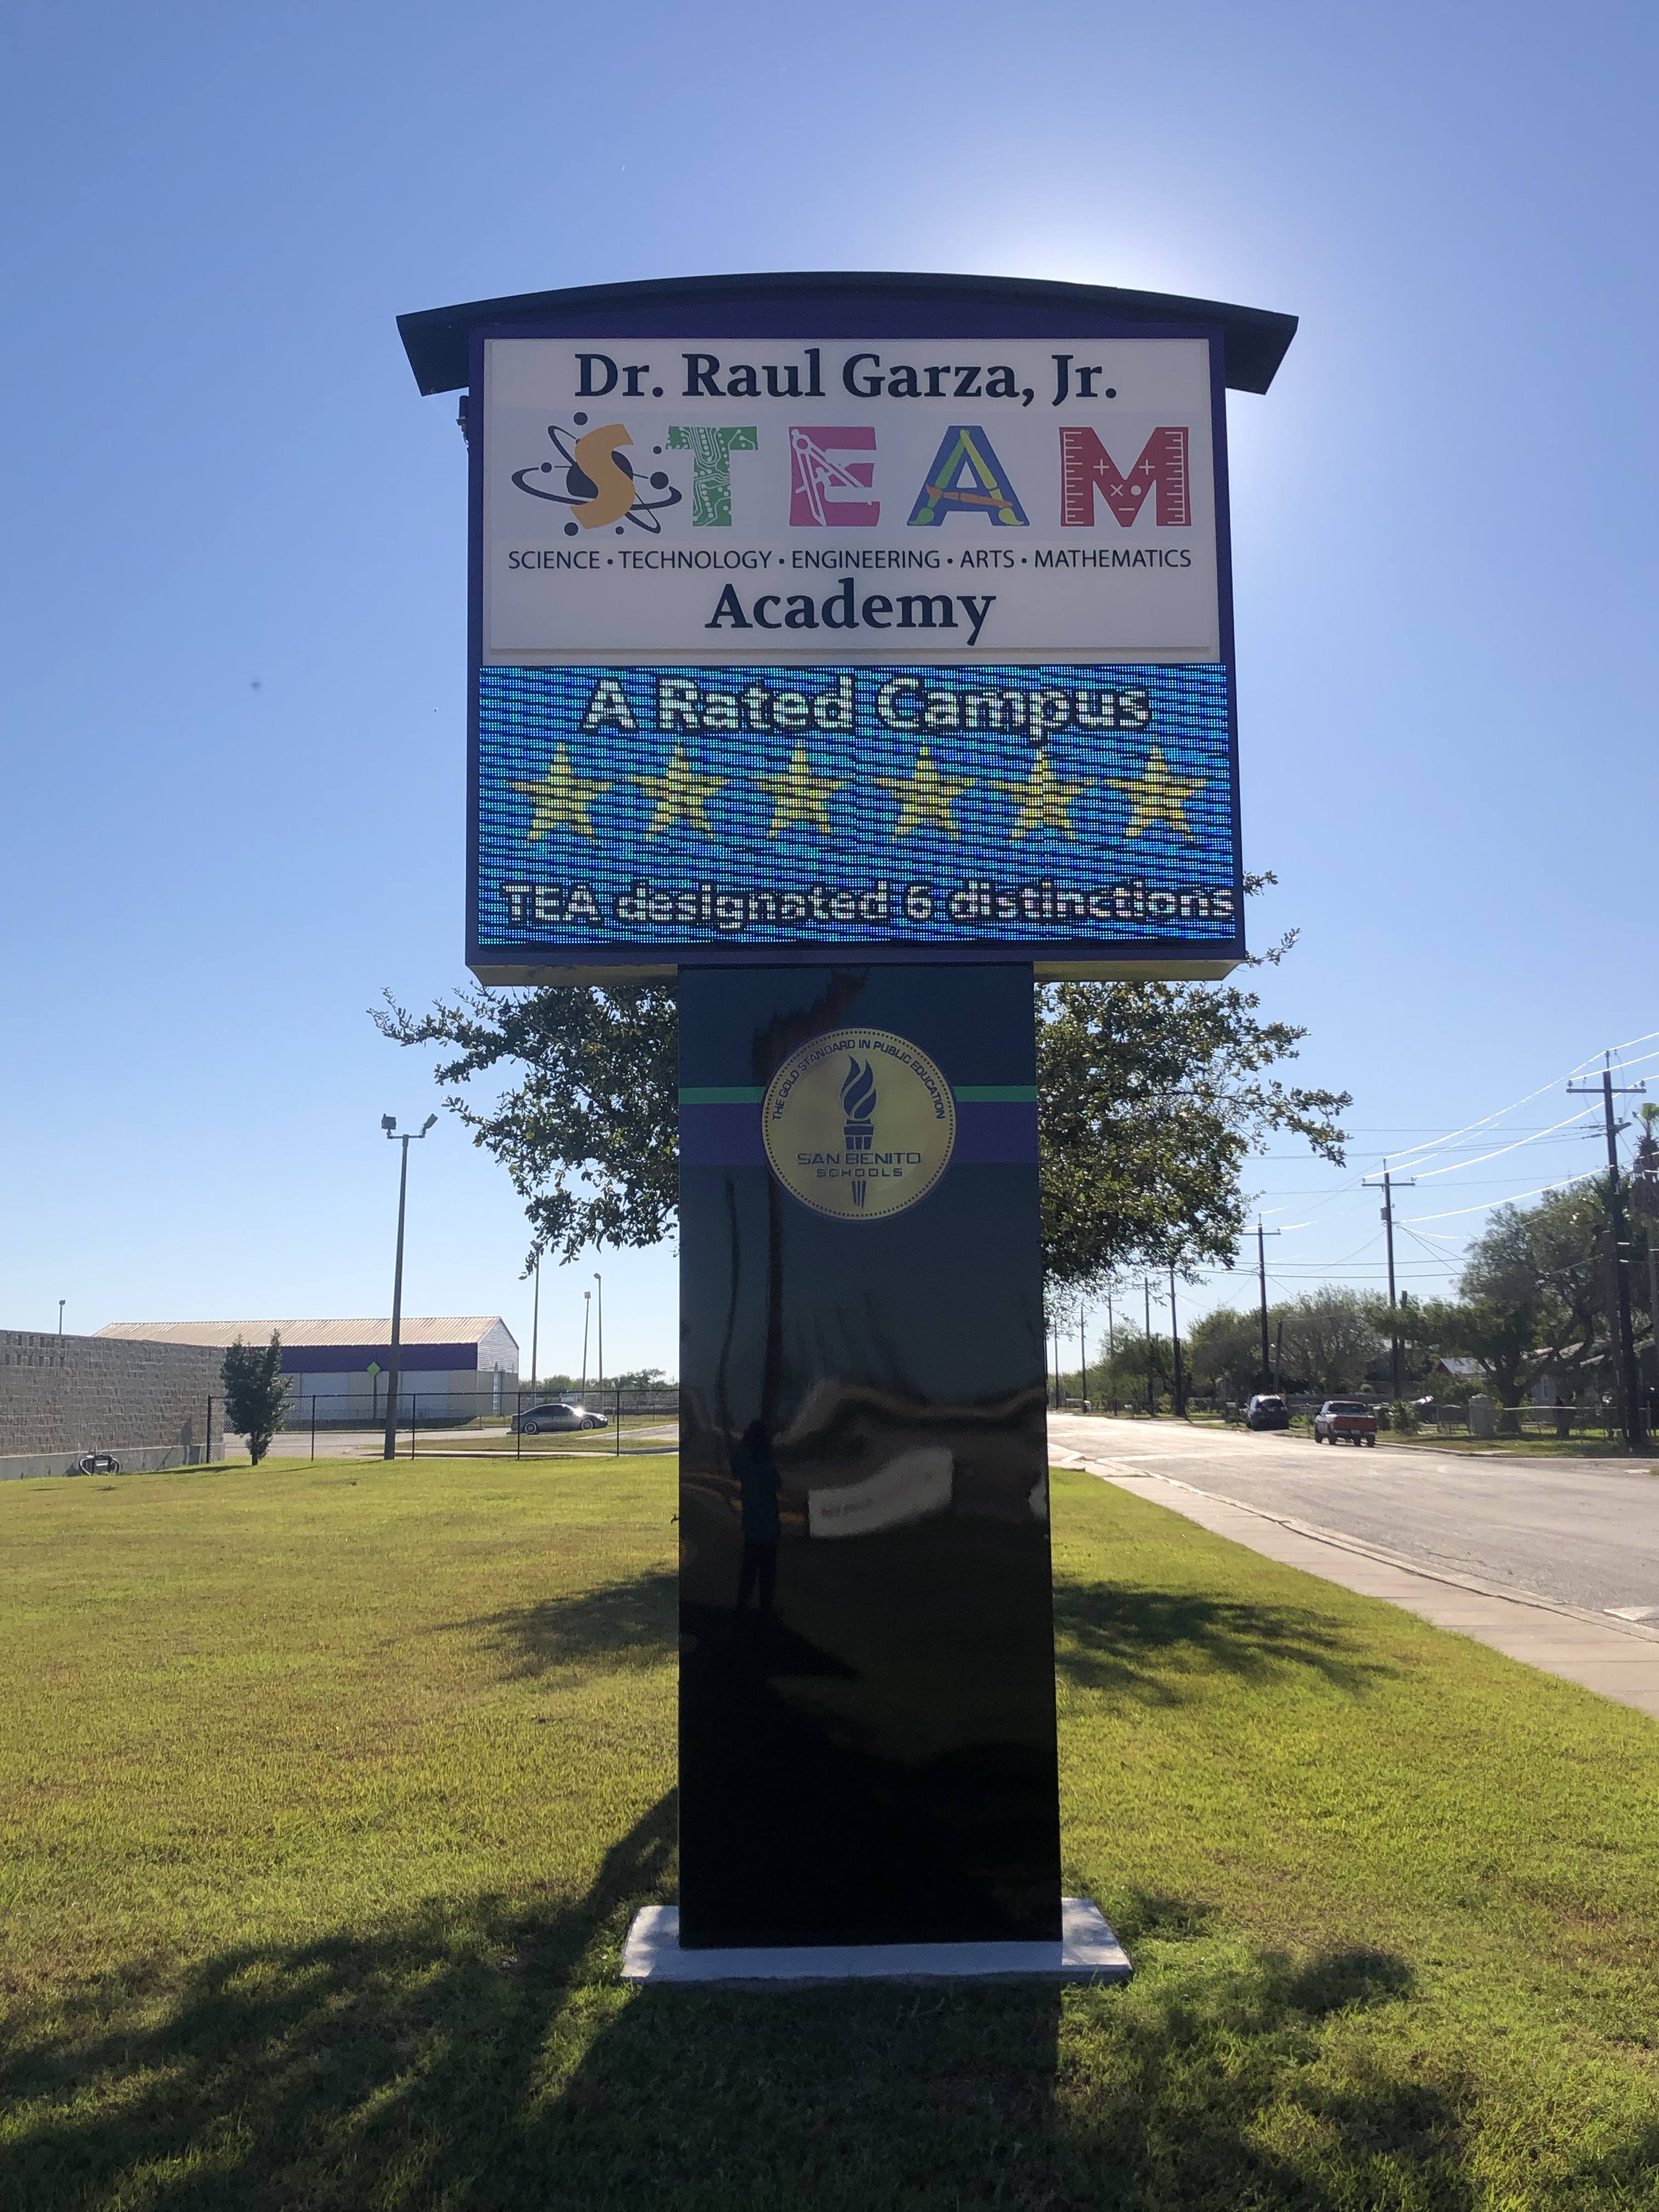 Implemented a digital signage solution to celebrate Dr. Raul Garza, Jr. STEAM Academy's outstanding academic achievements.